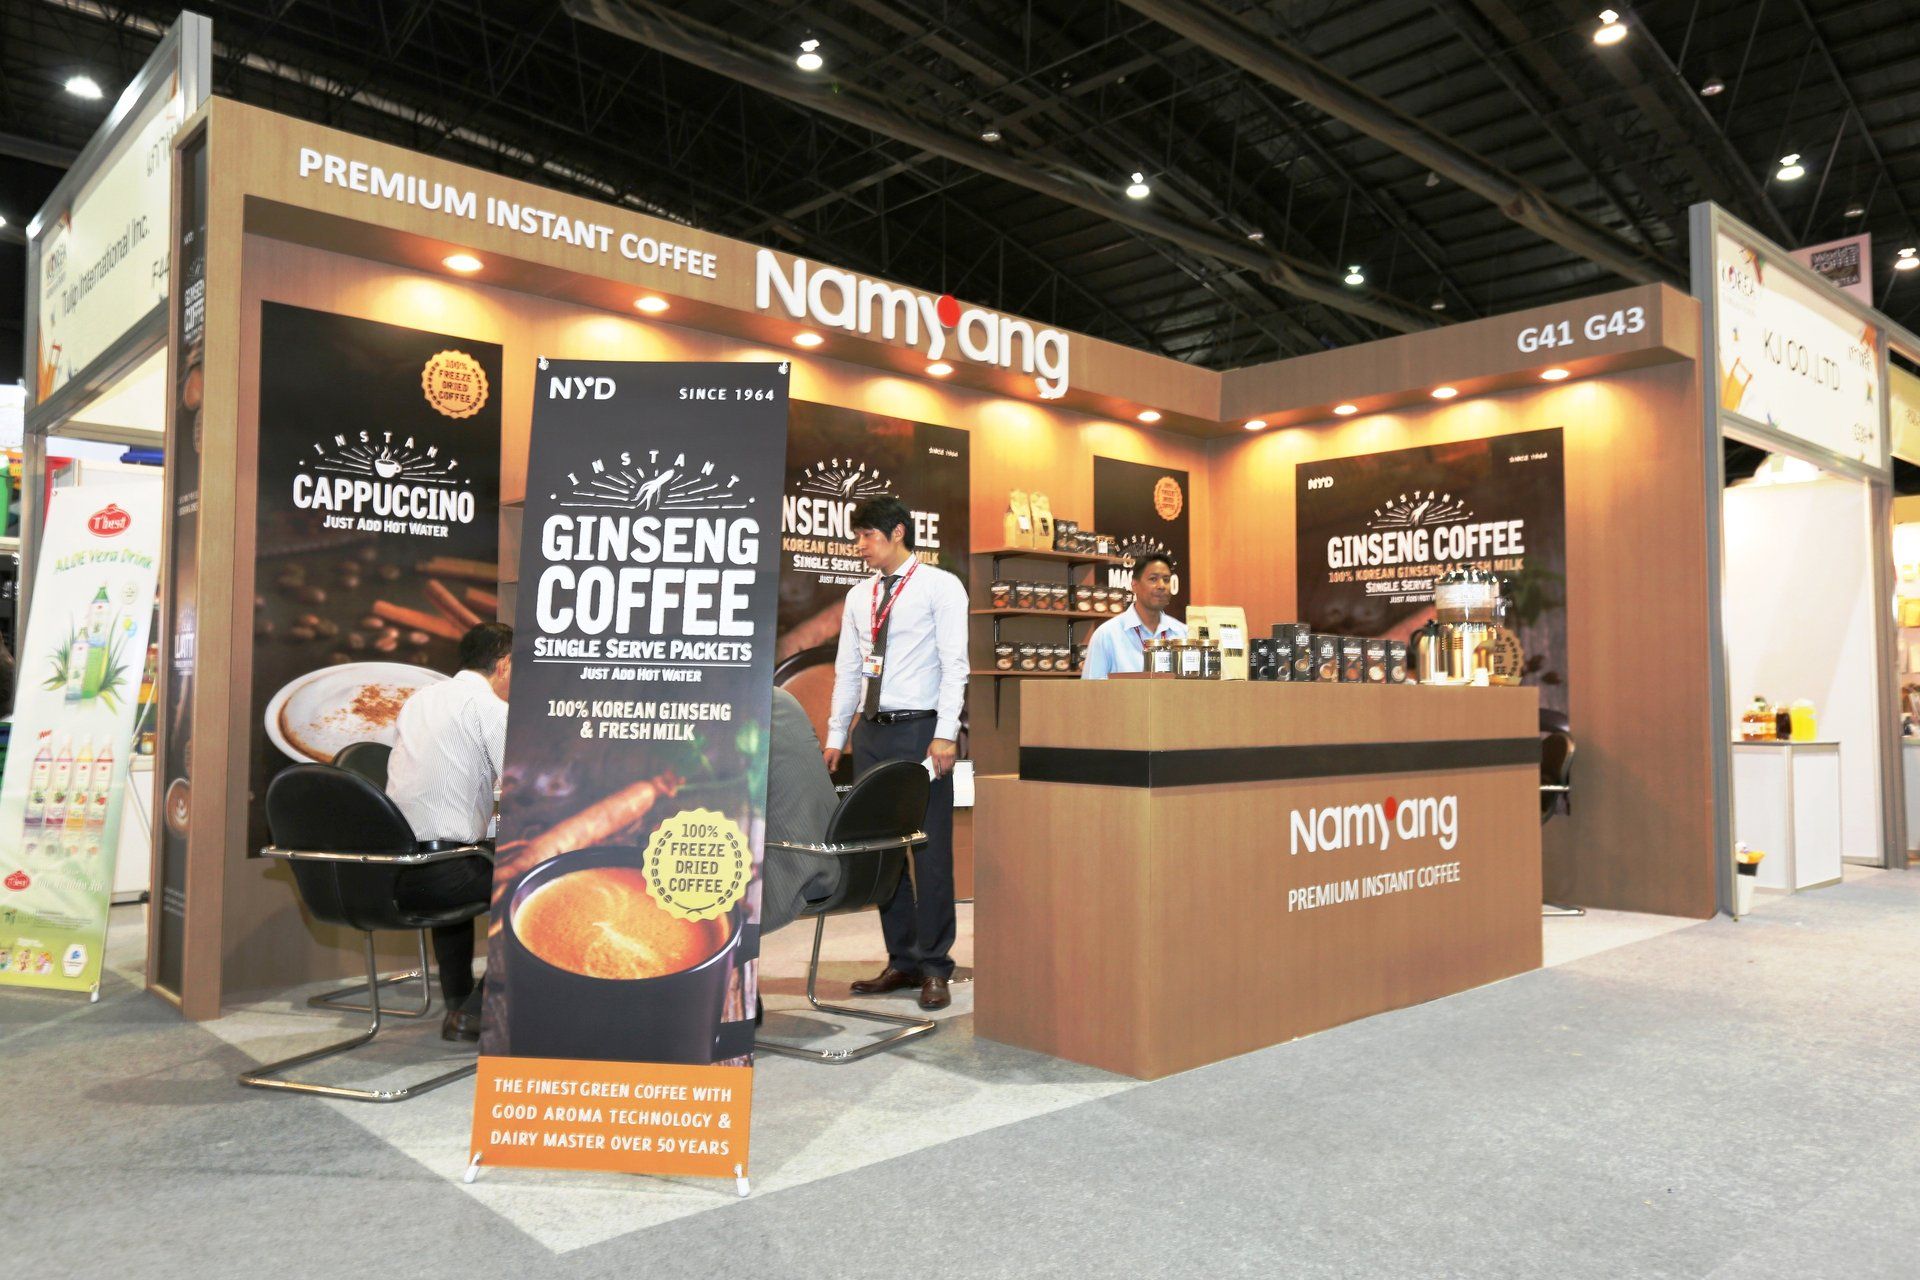 Namyang @ Thaifex 2015. Booth designed and built by Essential Global Fairs.